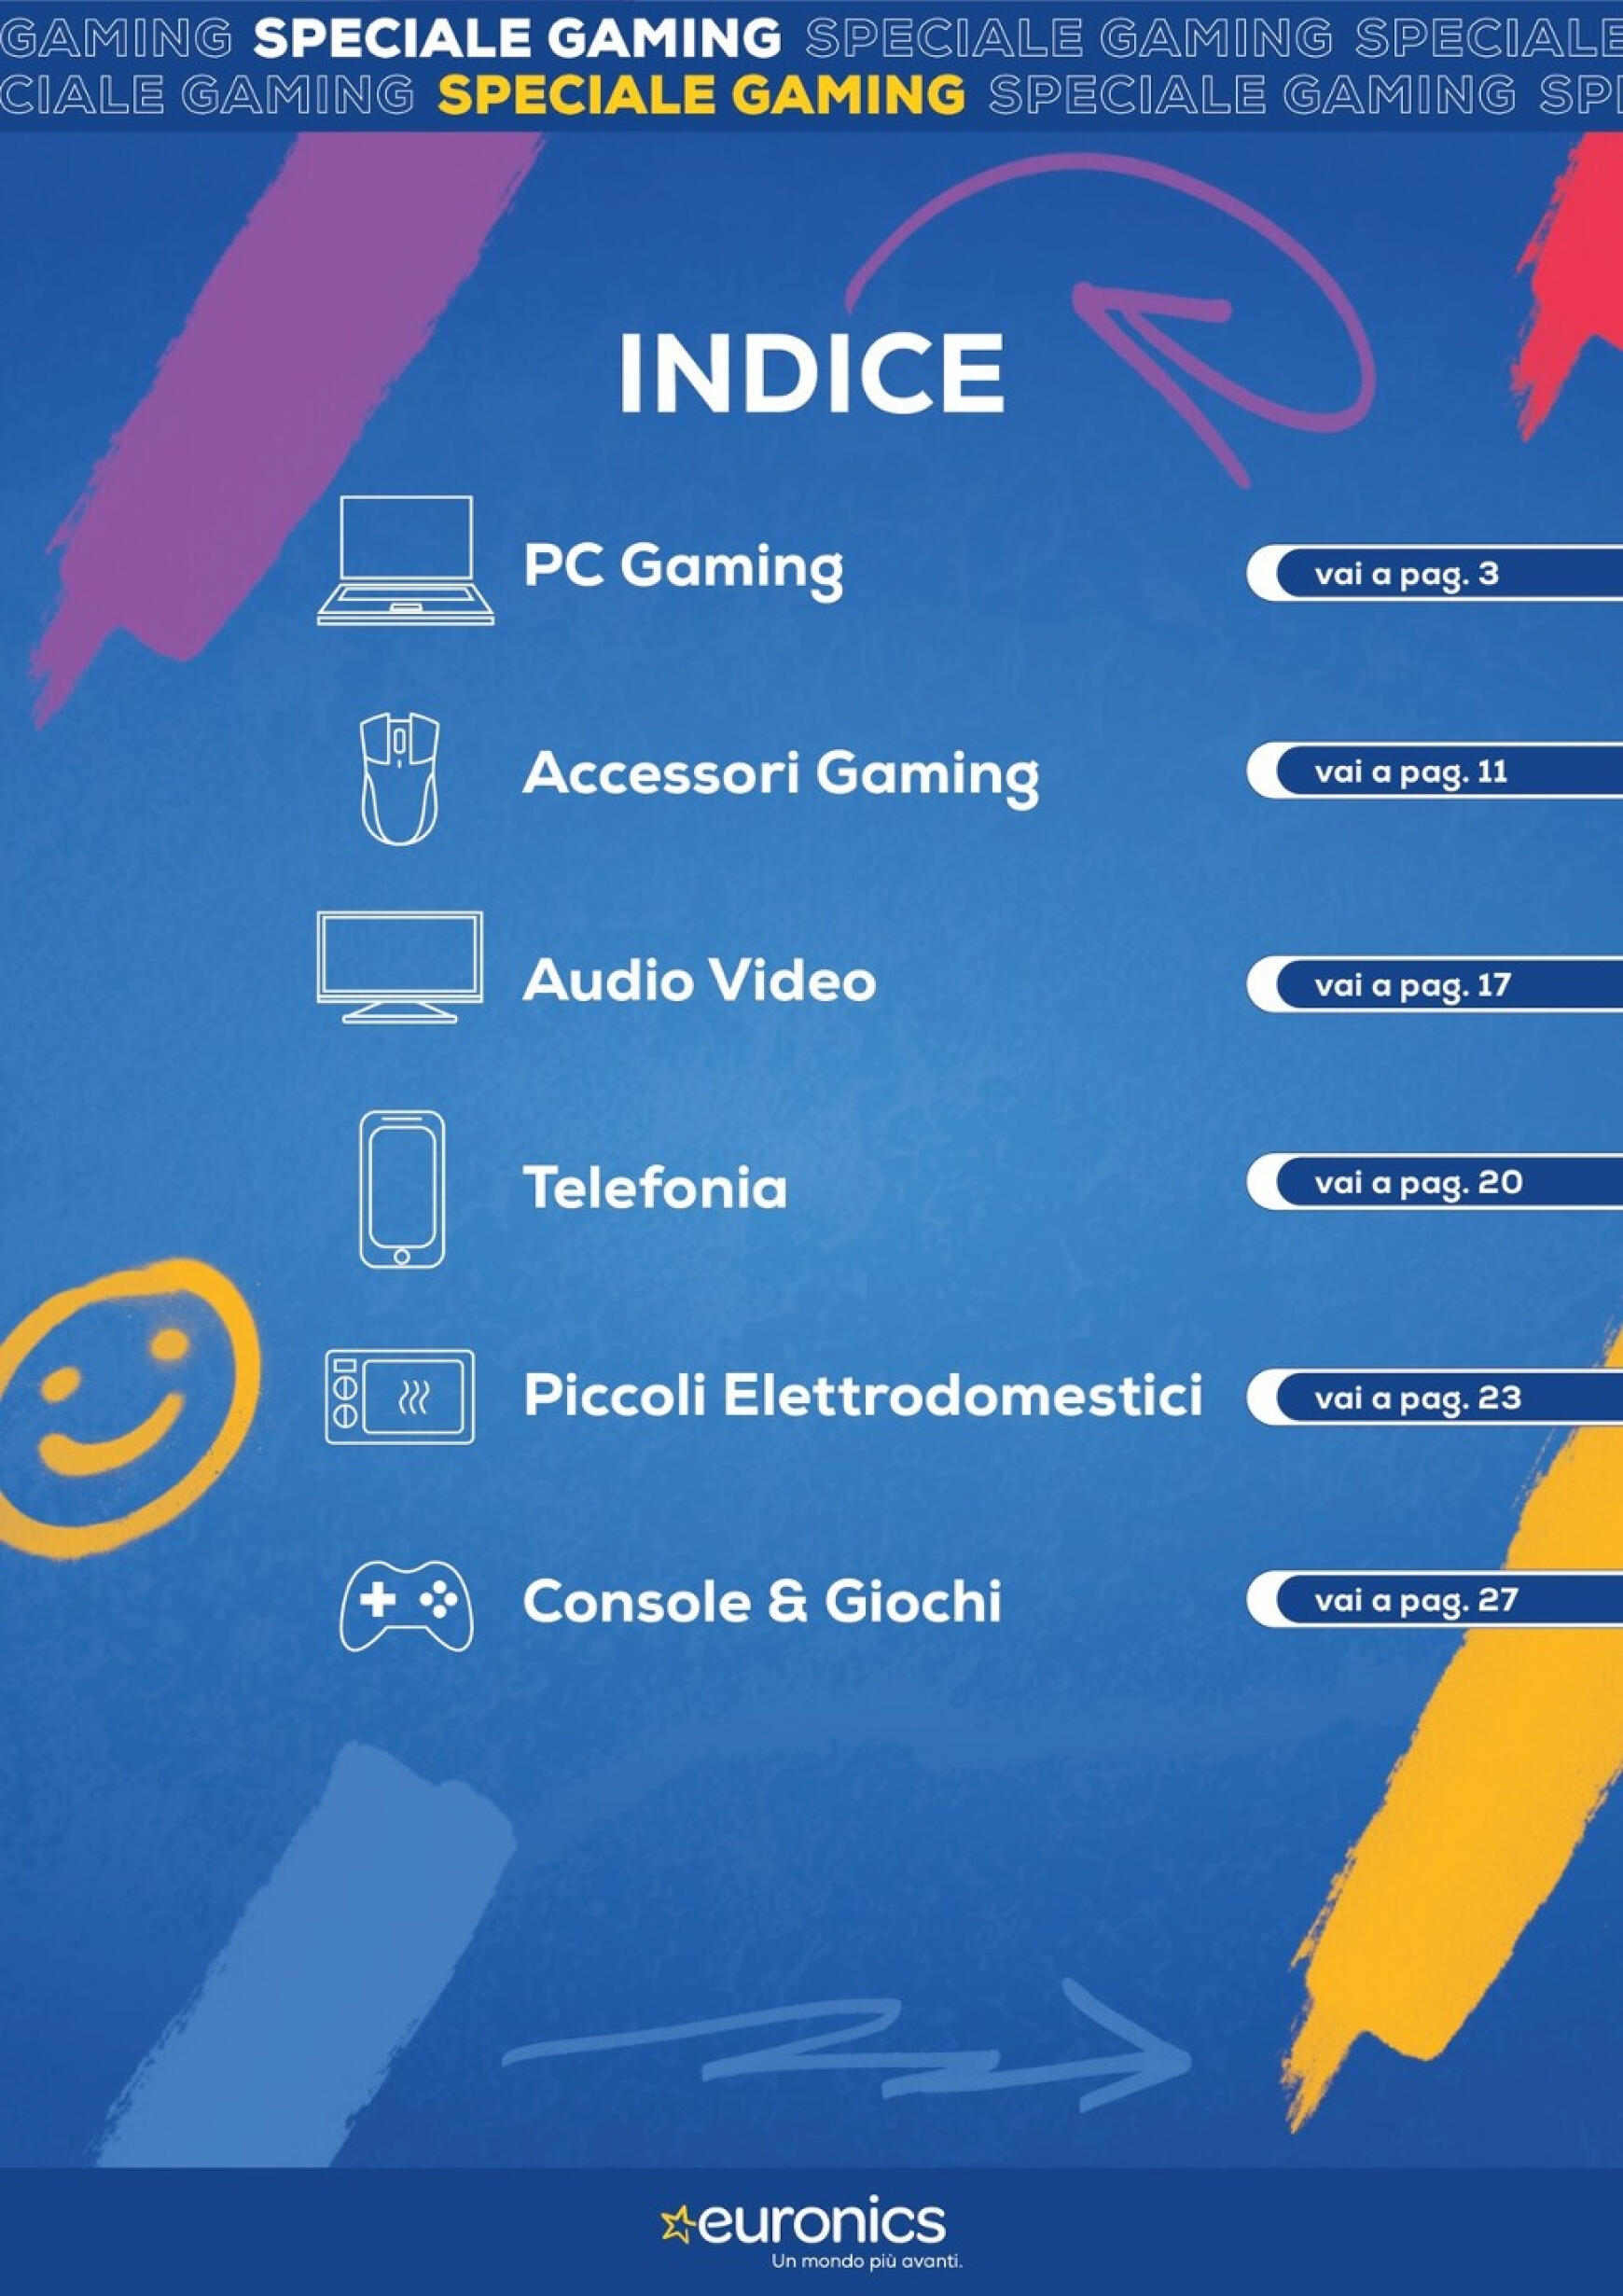 euronics - Nuovo volantino Euronics - Speciale Gaming 18.04. - 01.05. - page: 2